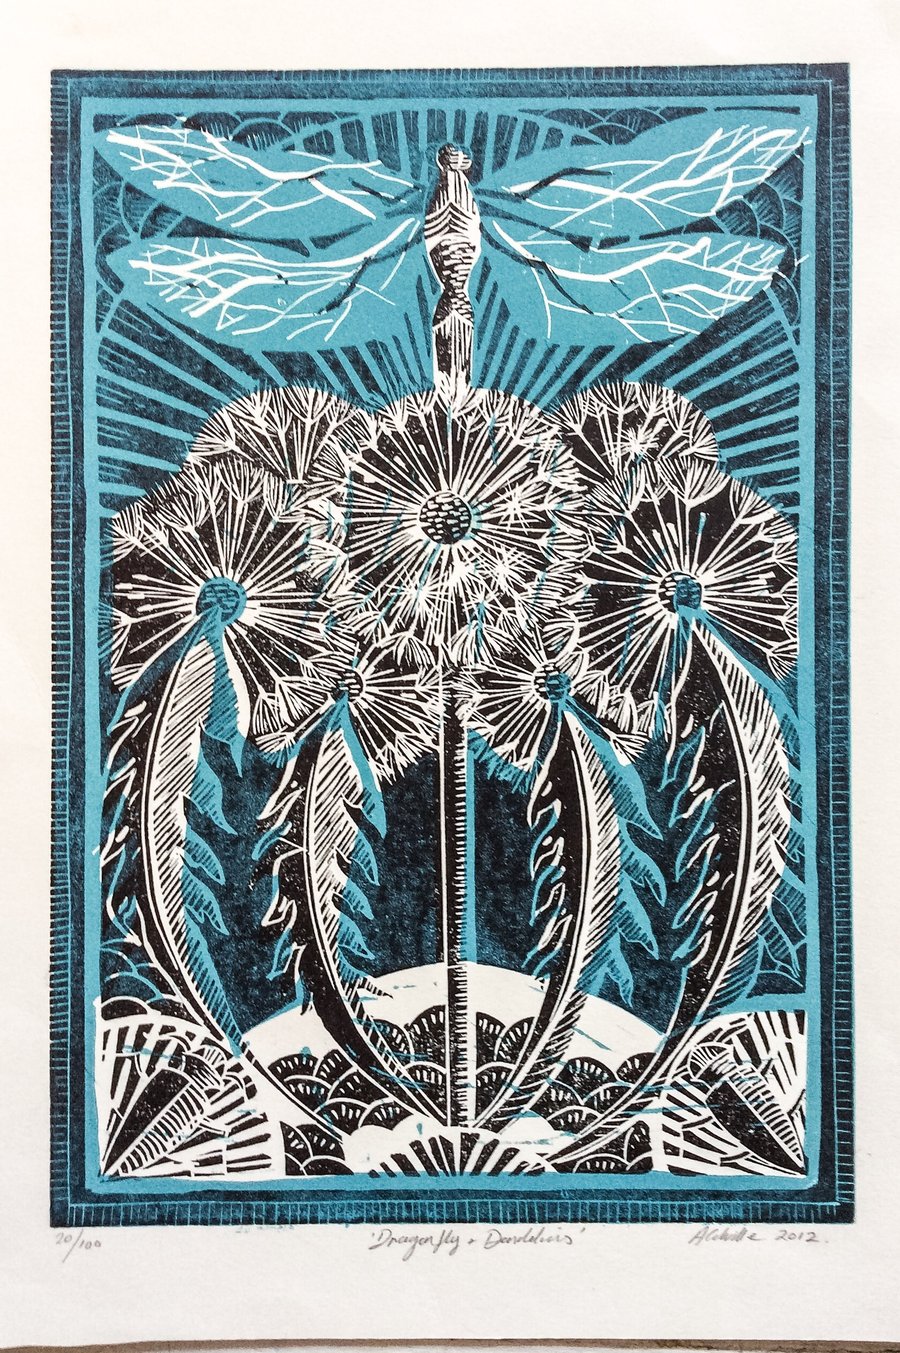 Dragonfly and Dandelions Blue Hand printed Linocut Print